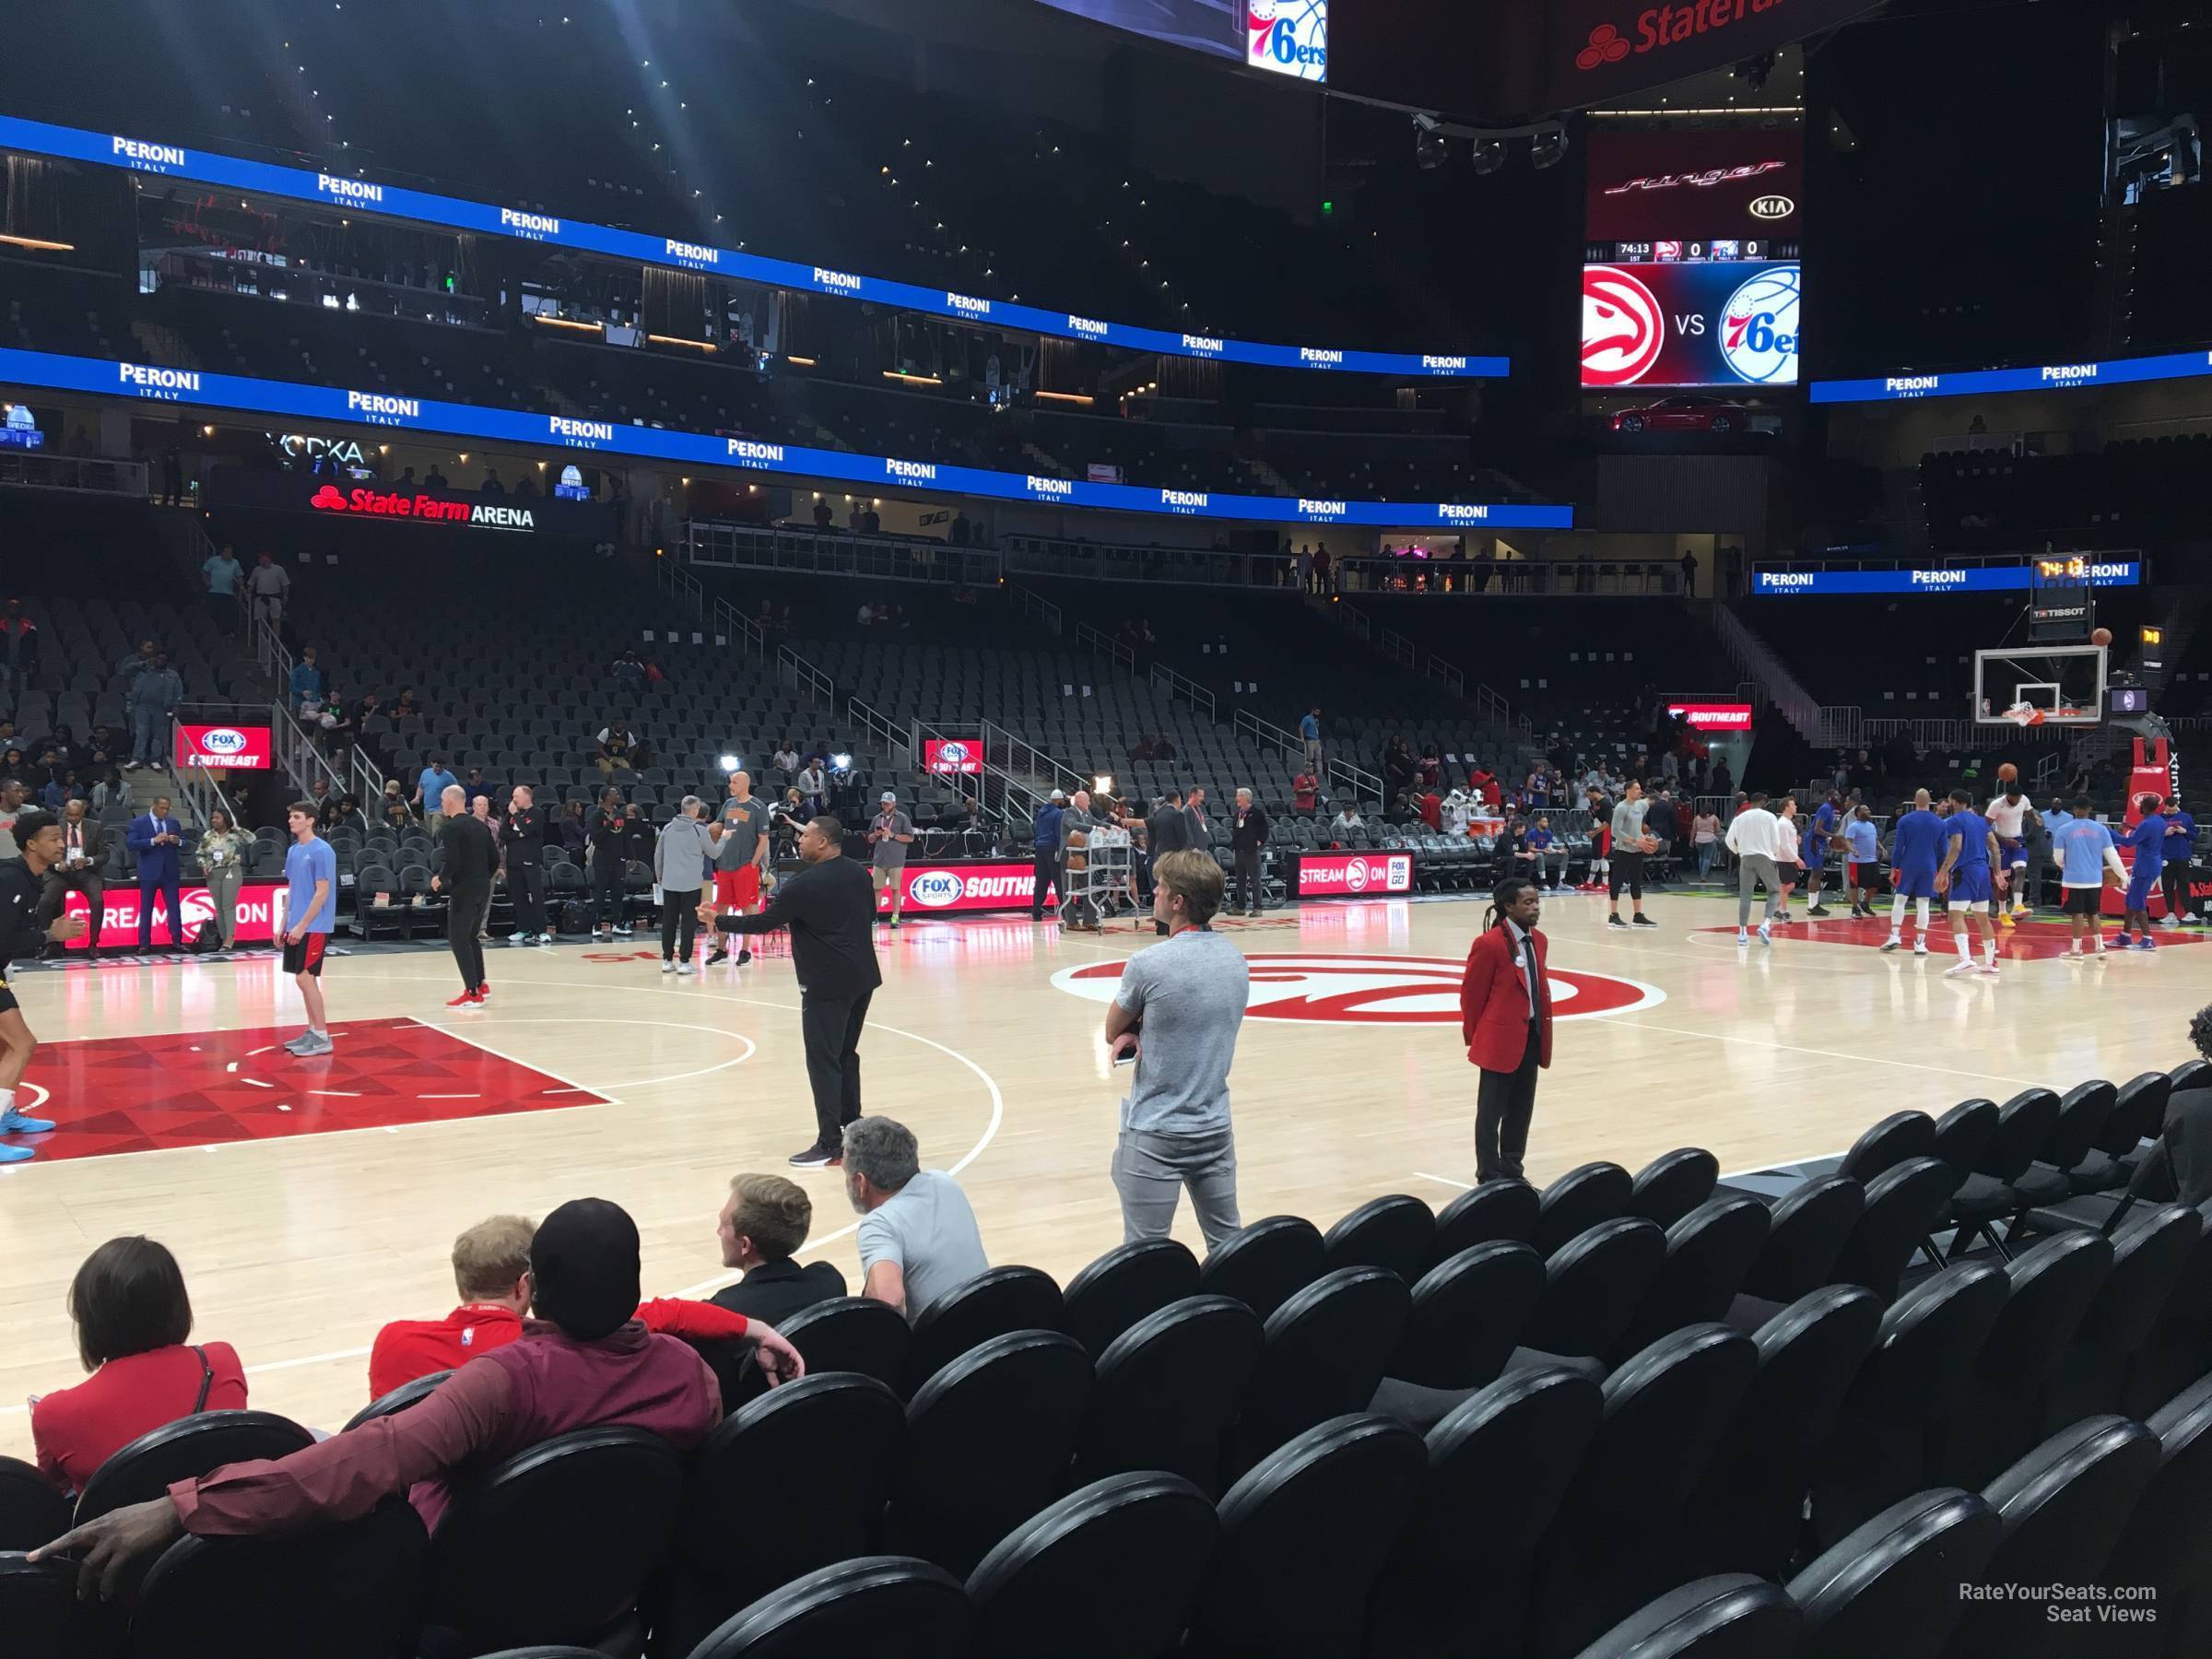 Courtside Seats At State Farm Arena